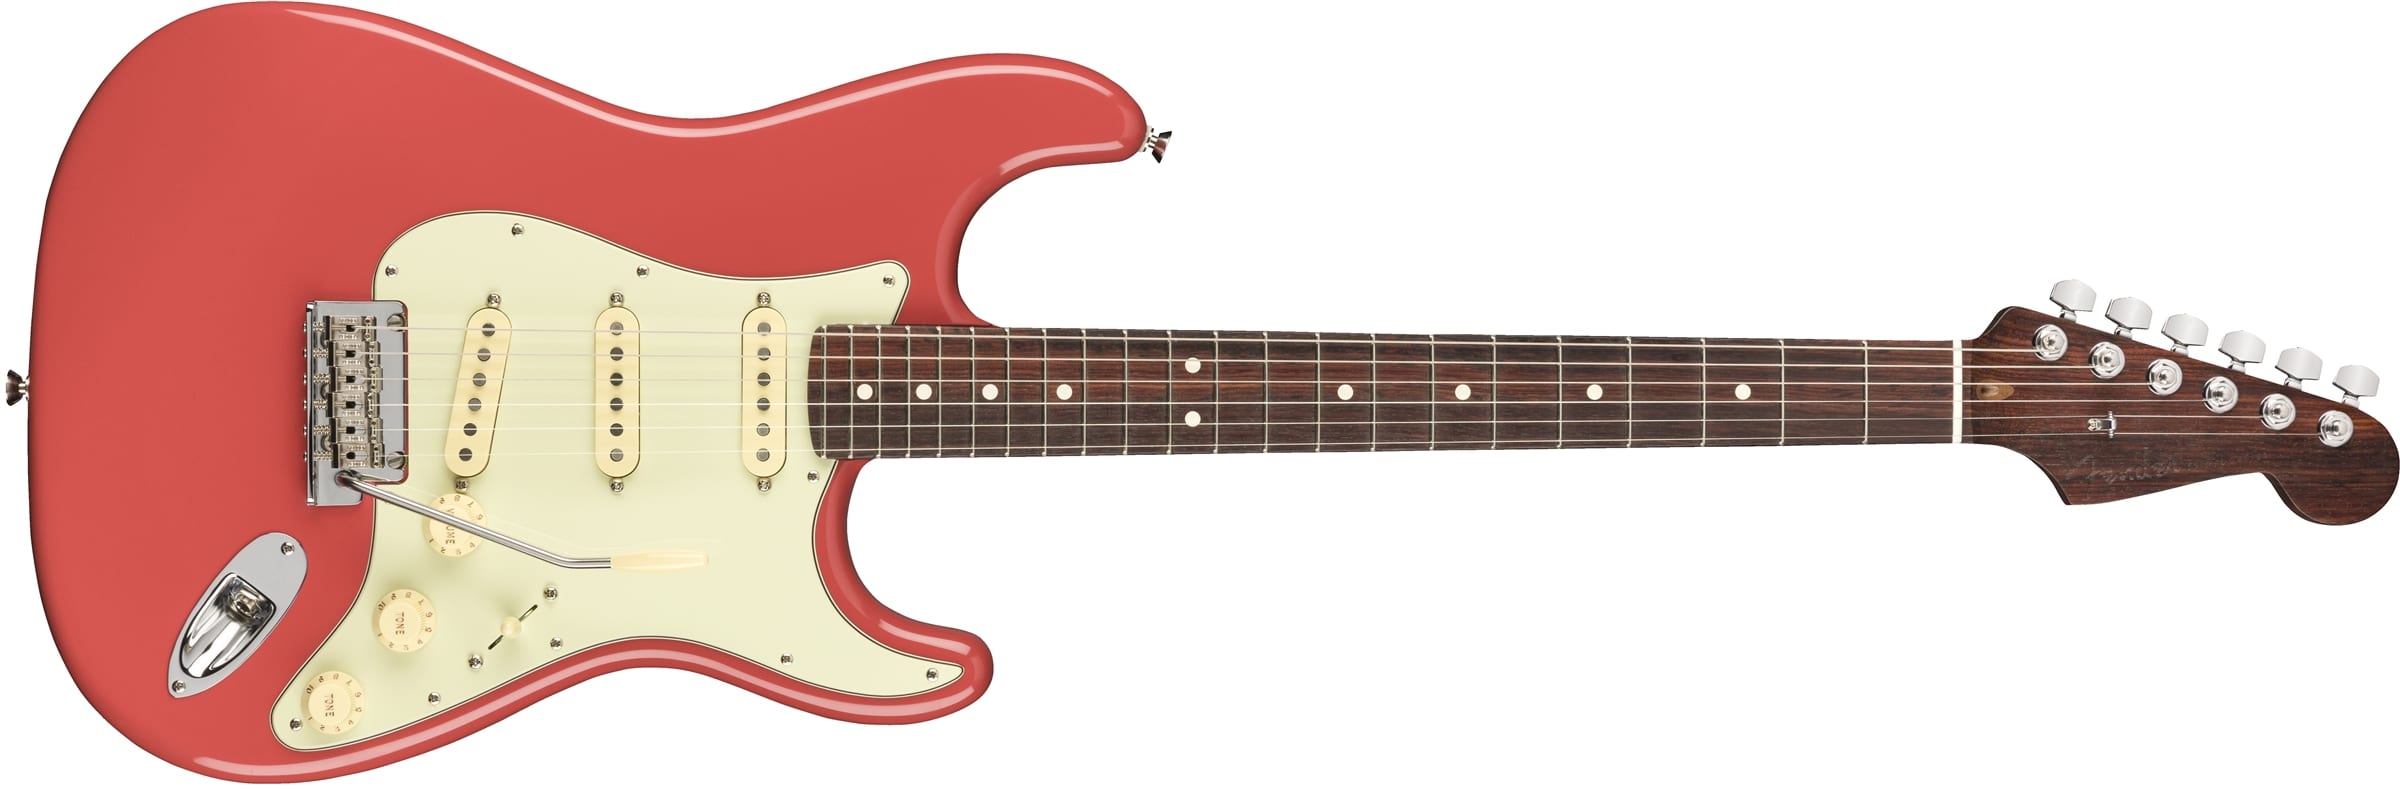 Fender 2020 Limited Edition American Professional Stratocaster in Fiesta Red